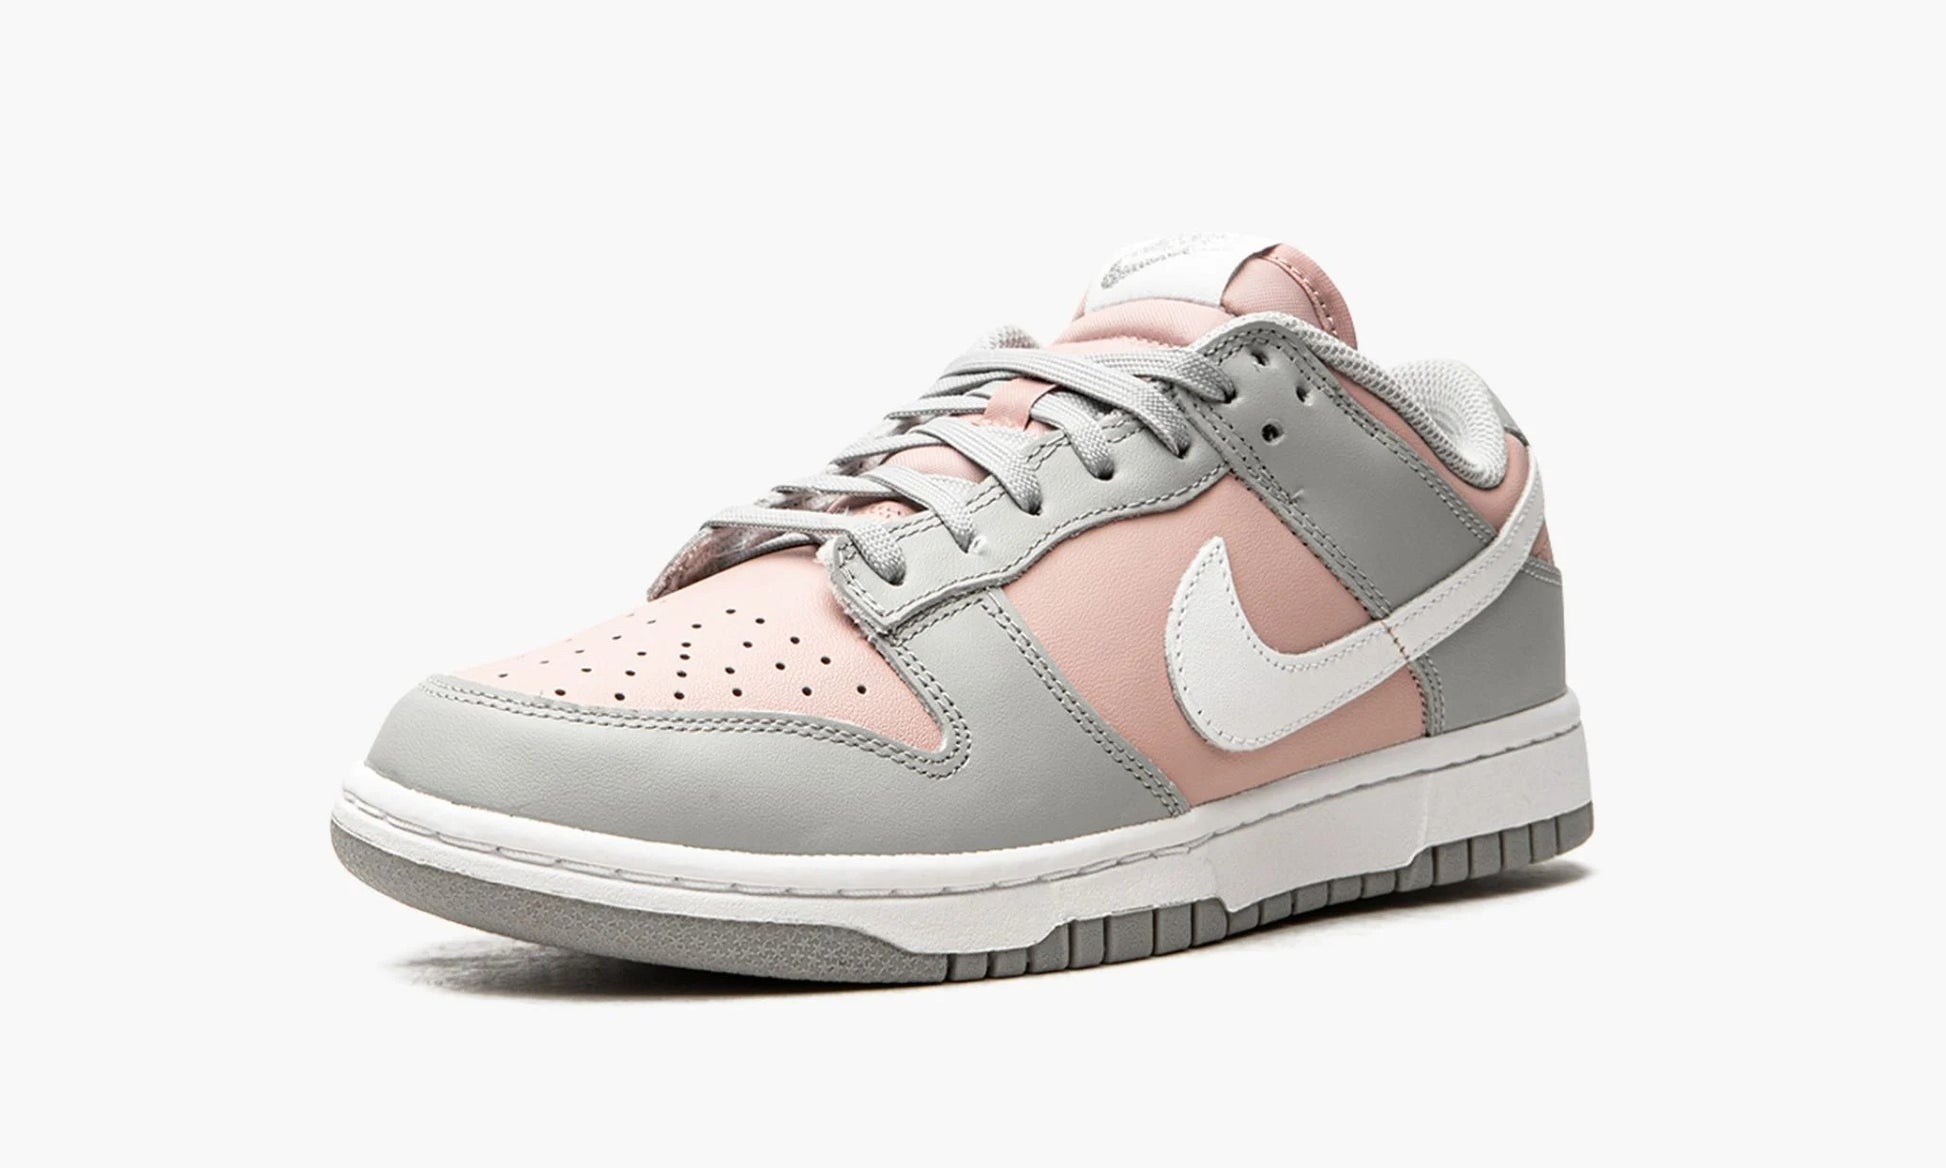 Dunk Low WMNS Pink Oxford - DM8329 600 | The Sortage